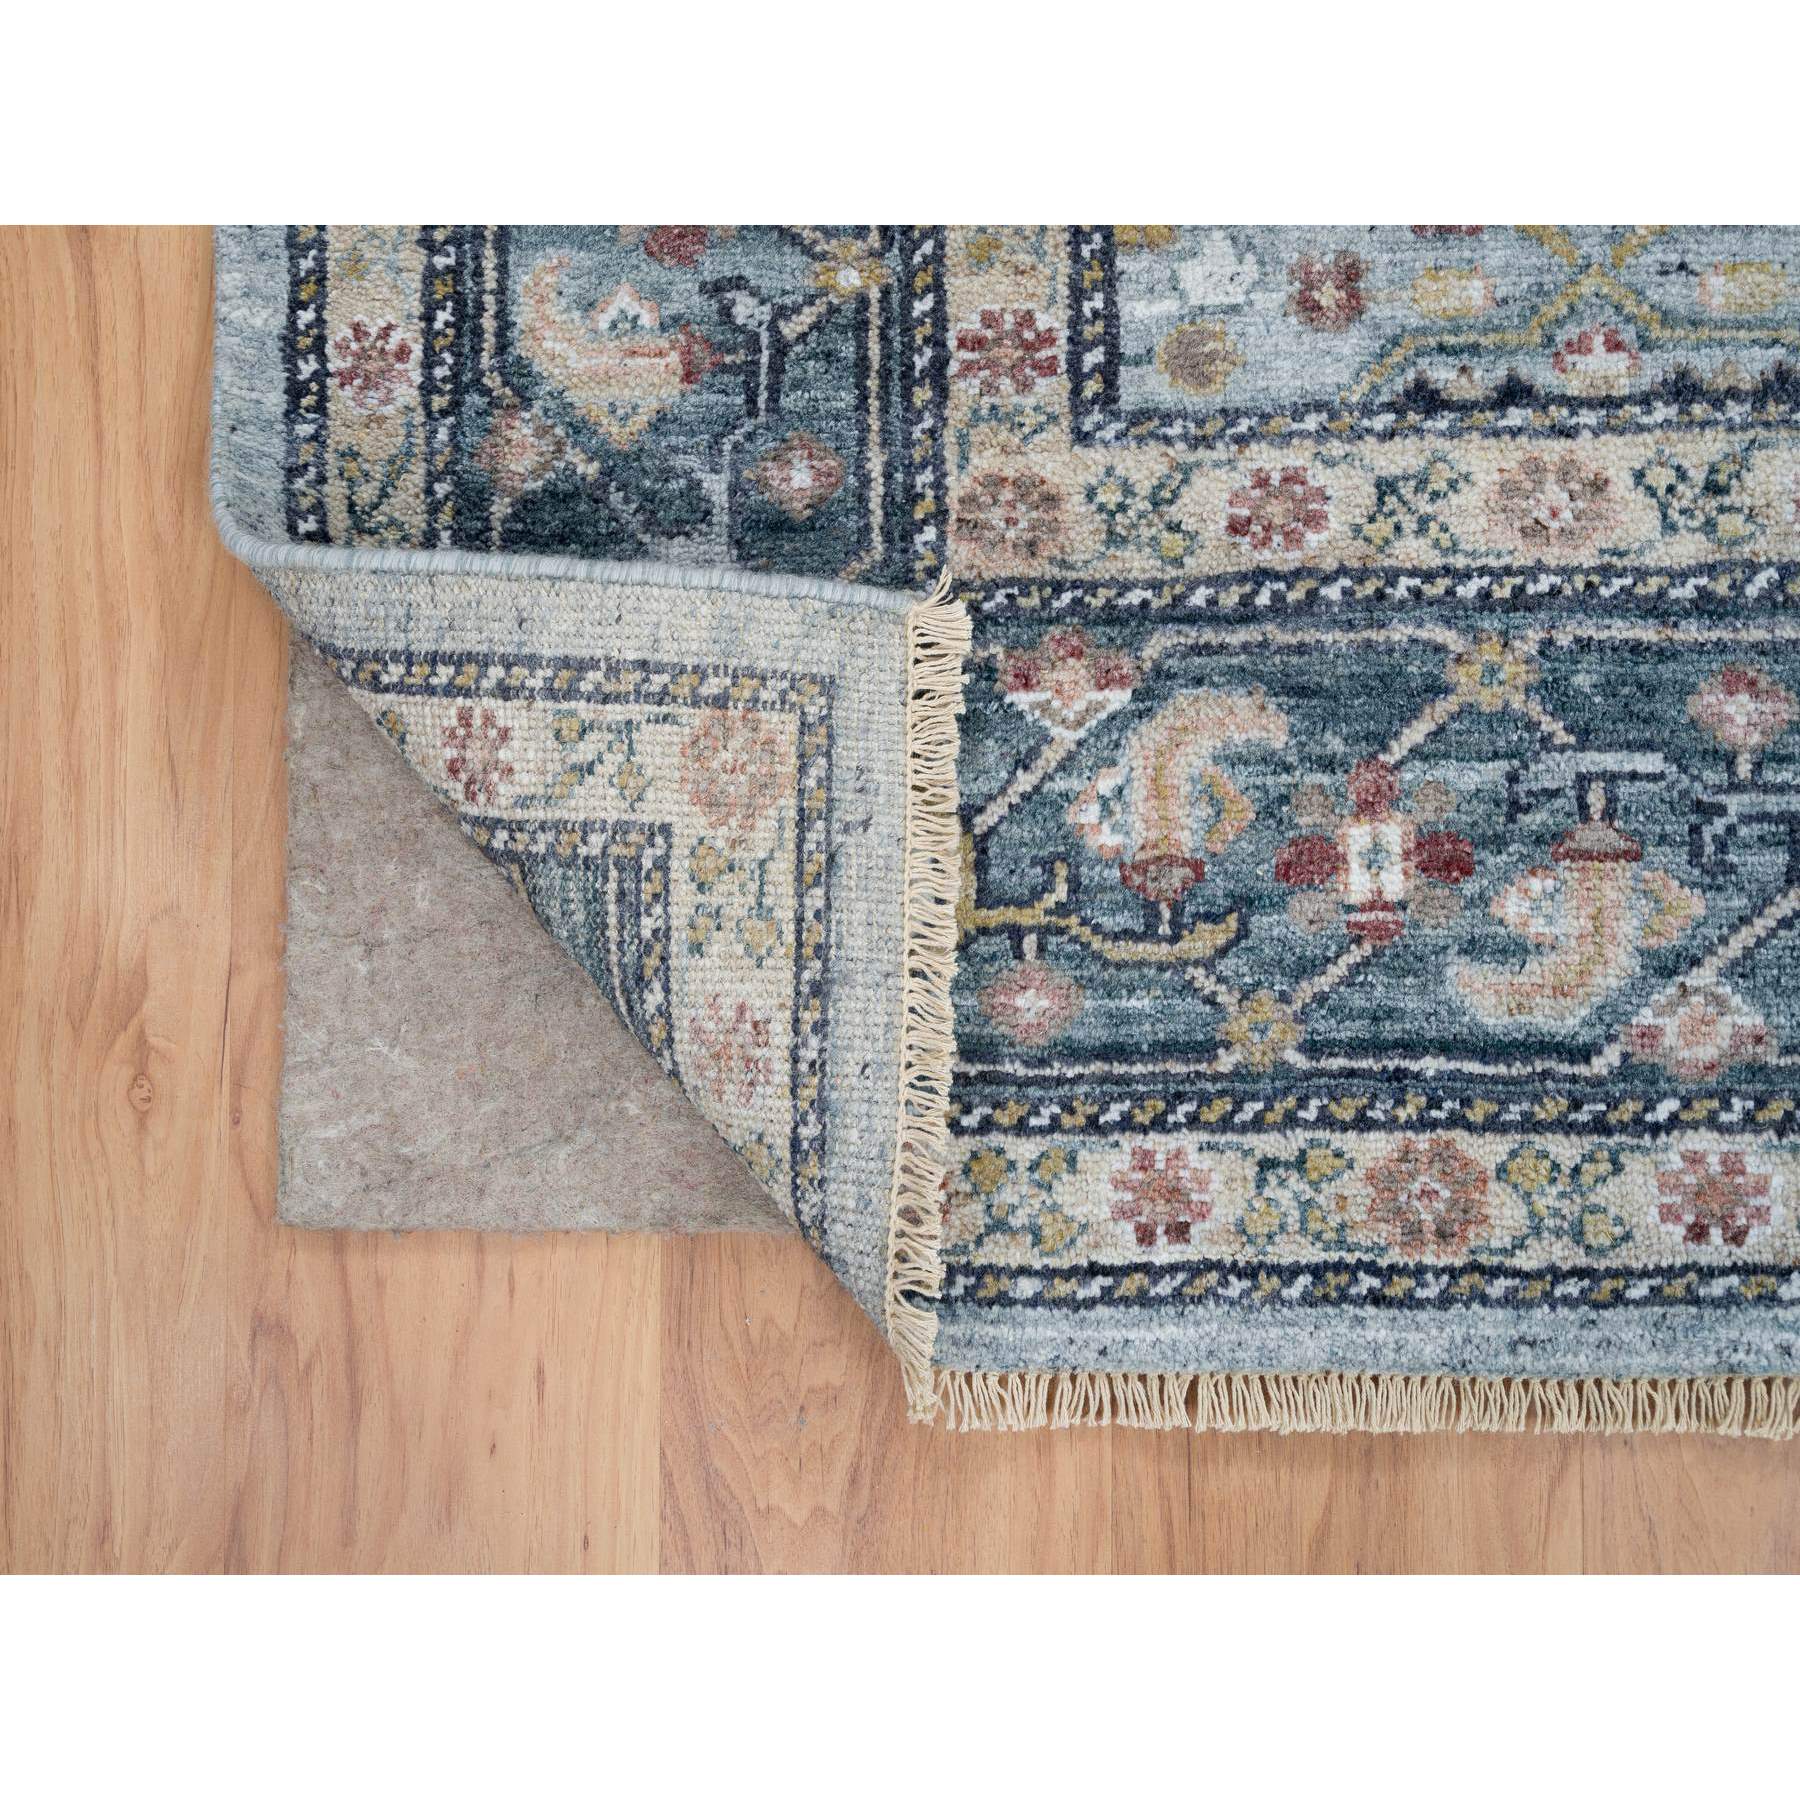 8'x9'9" Light Blue, Bidjar Garus Heritage Design with Soft Colors Thick and Plush, Hand Woven Pure Wool, Oriental Rug 